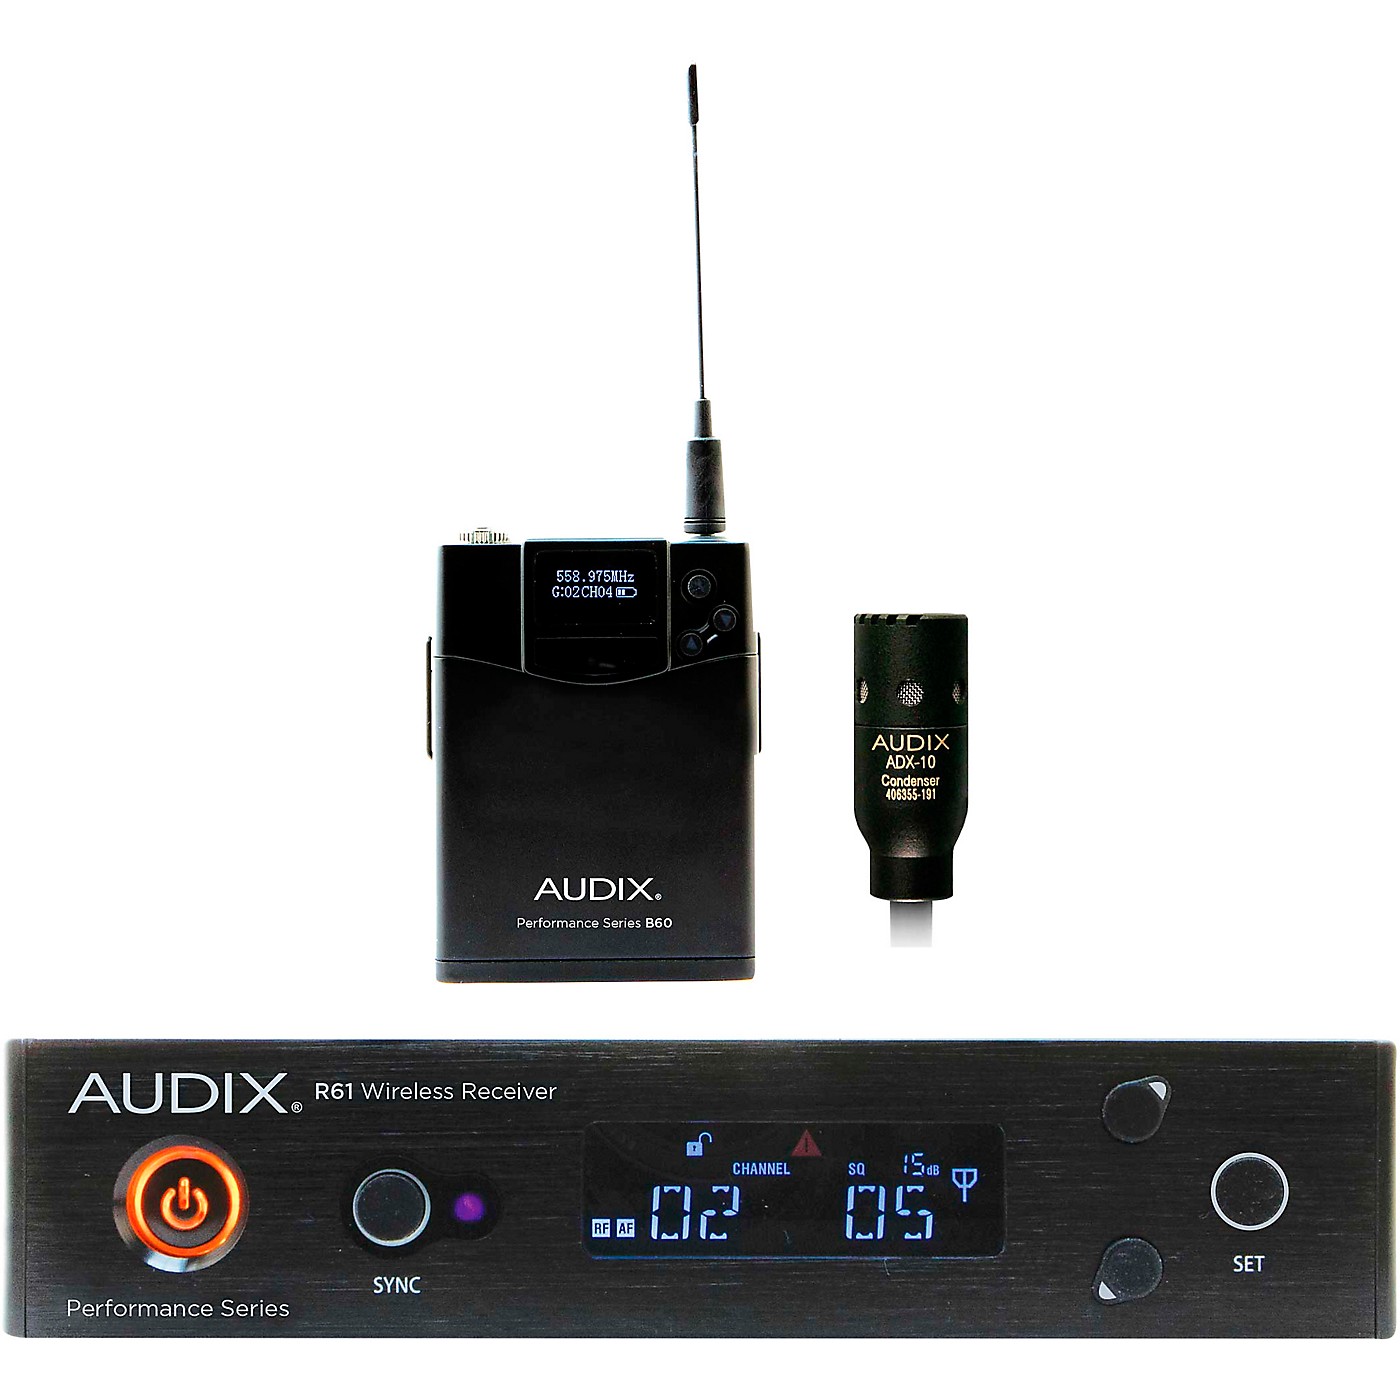 Audix AP61 L10 Wireless Microphone System with R61 True Diversity Receiver, B60 Bodypack Transmitter and ADX10 Lavalier Microphone thumbnail